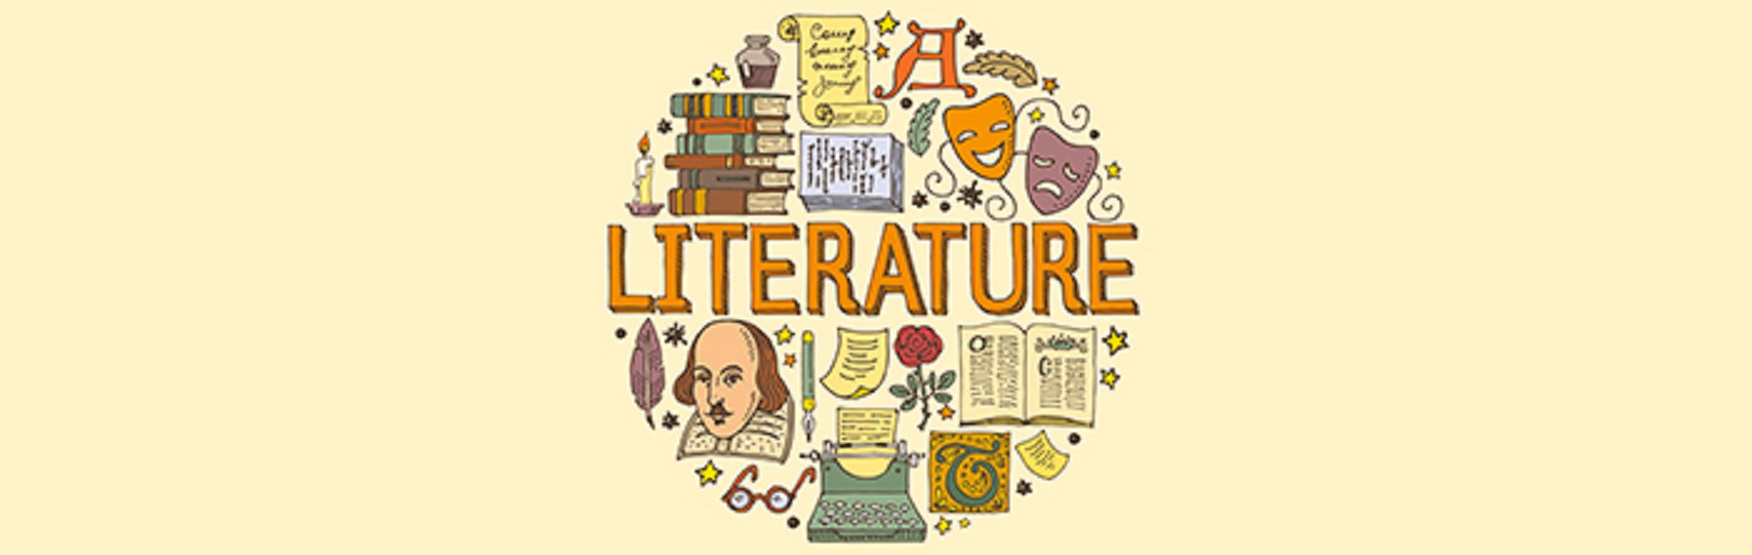 LIT12: 21st Century Literature from the Philippines and the World